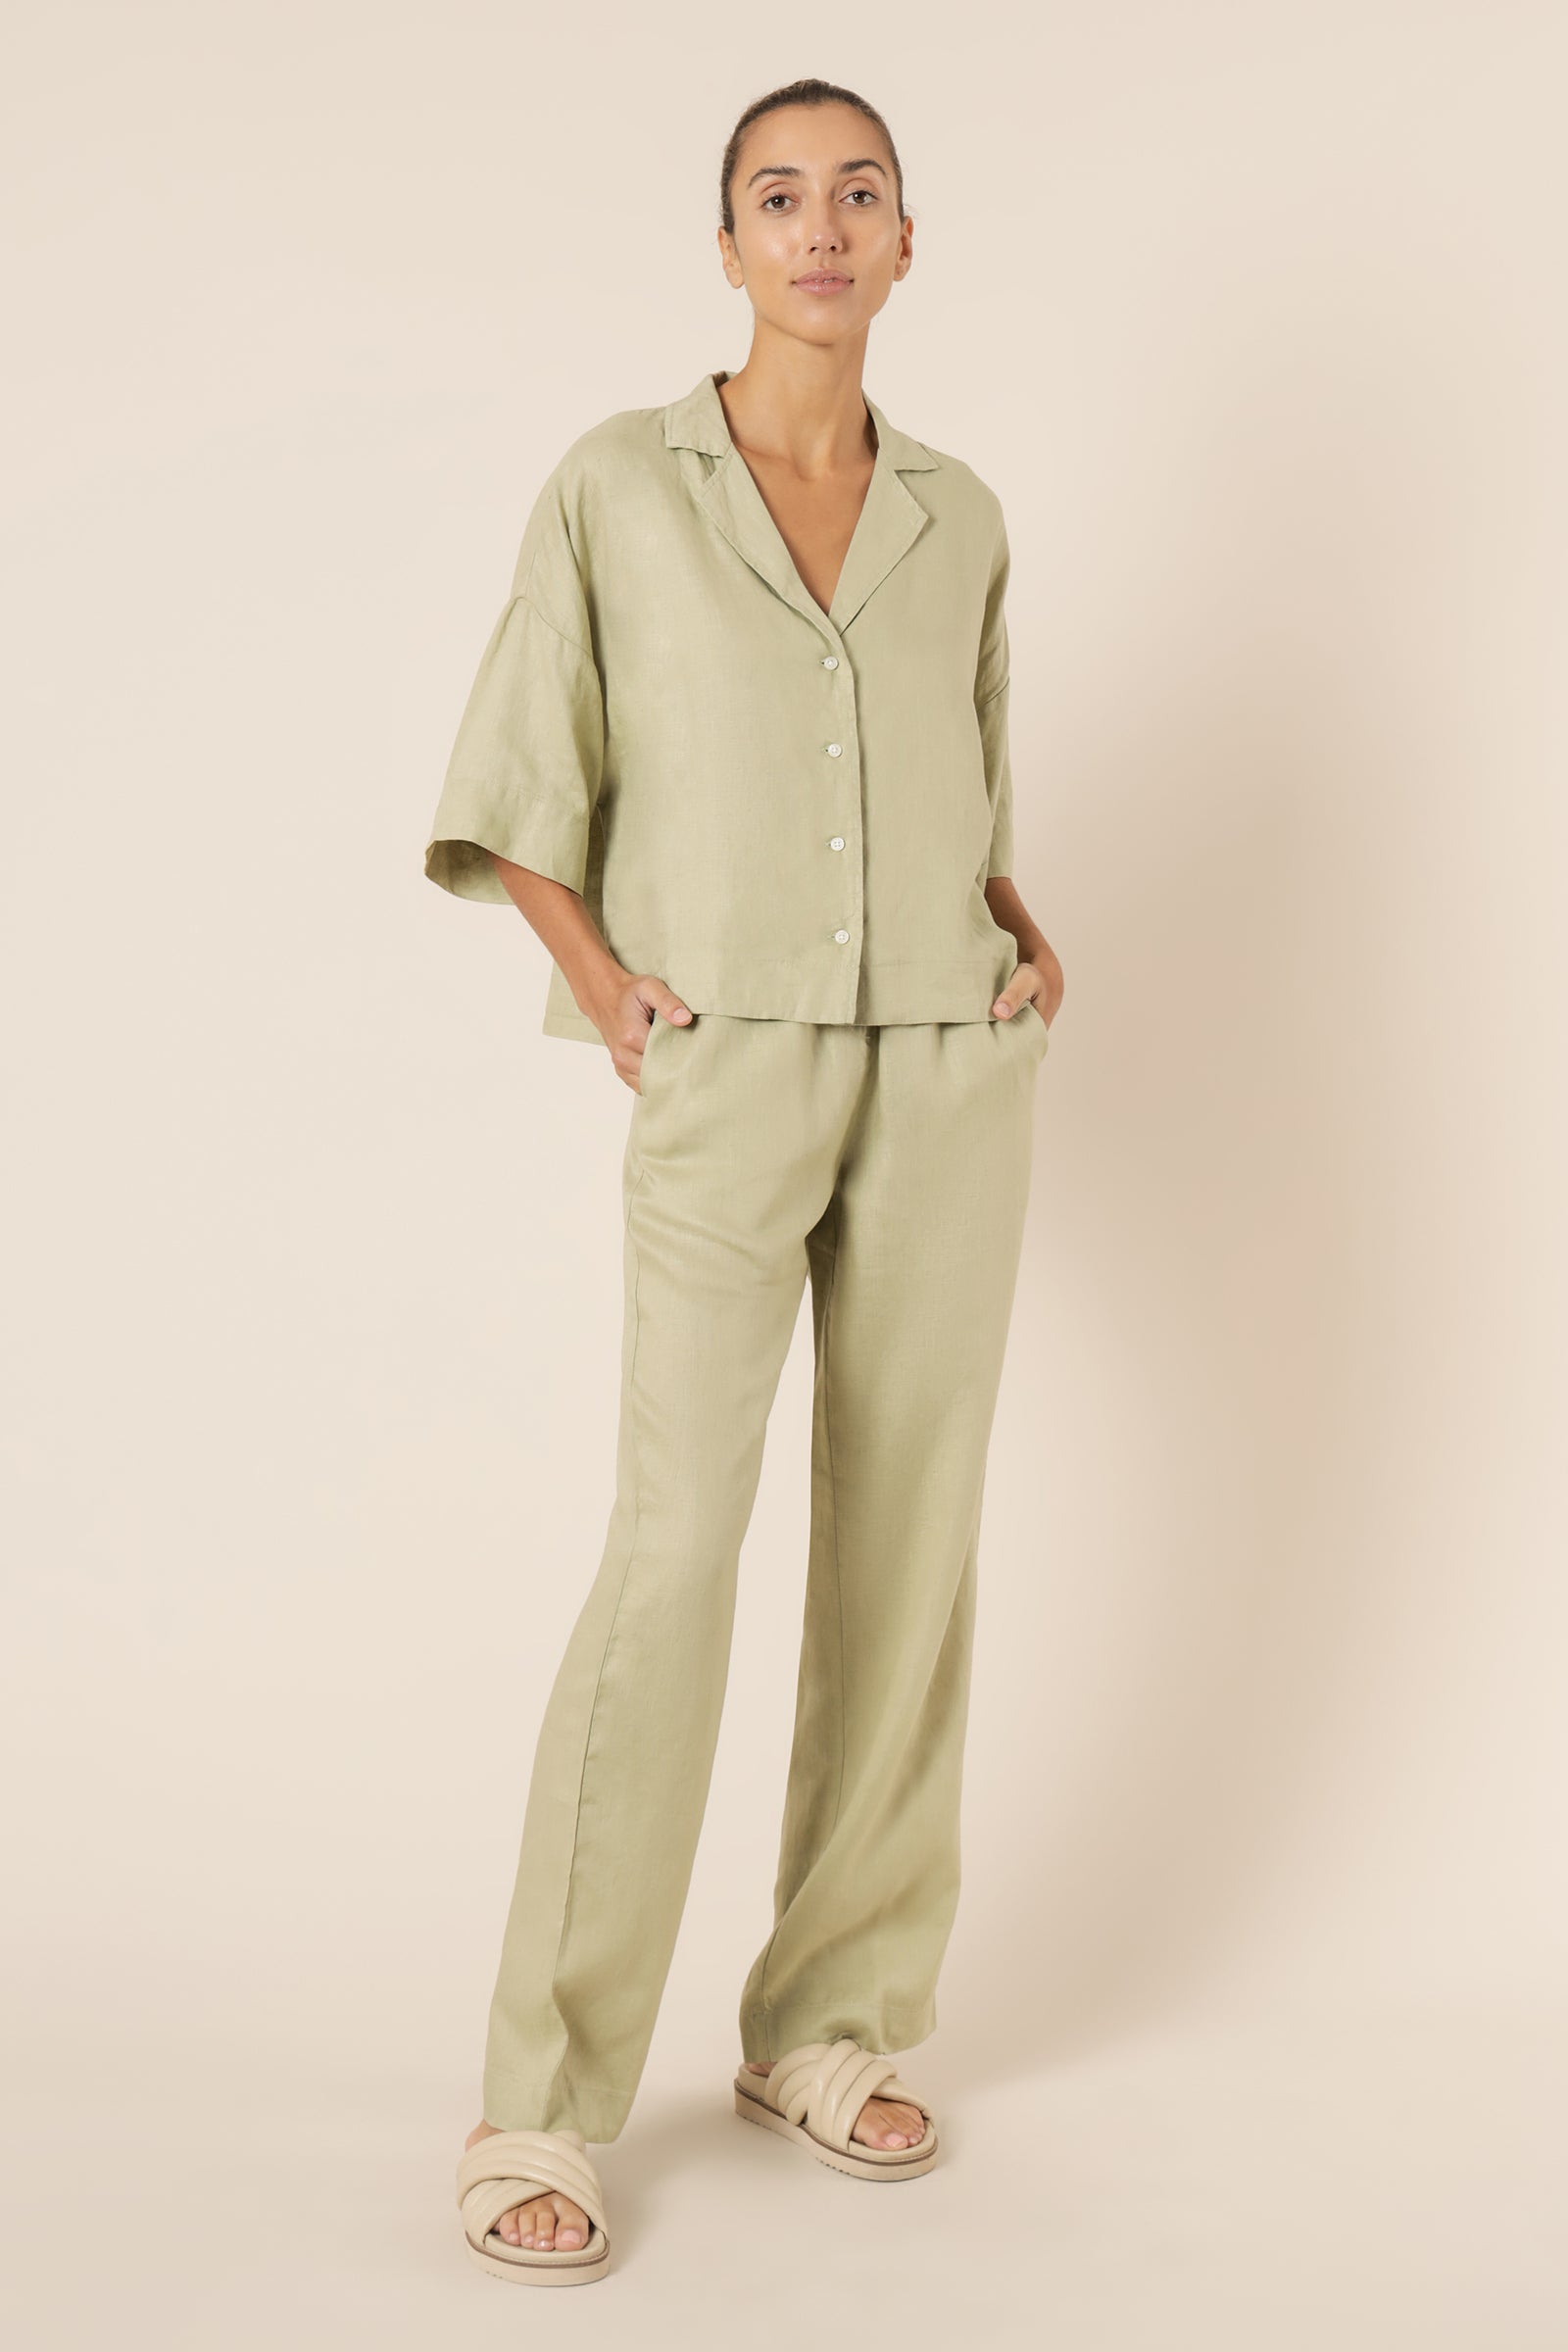 Nude Lucy Nude Linen Lounge Pant Washed Sage Pants 